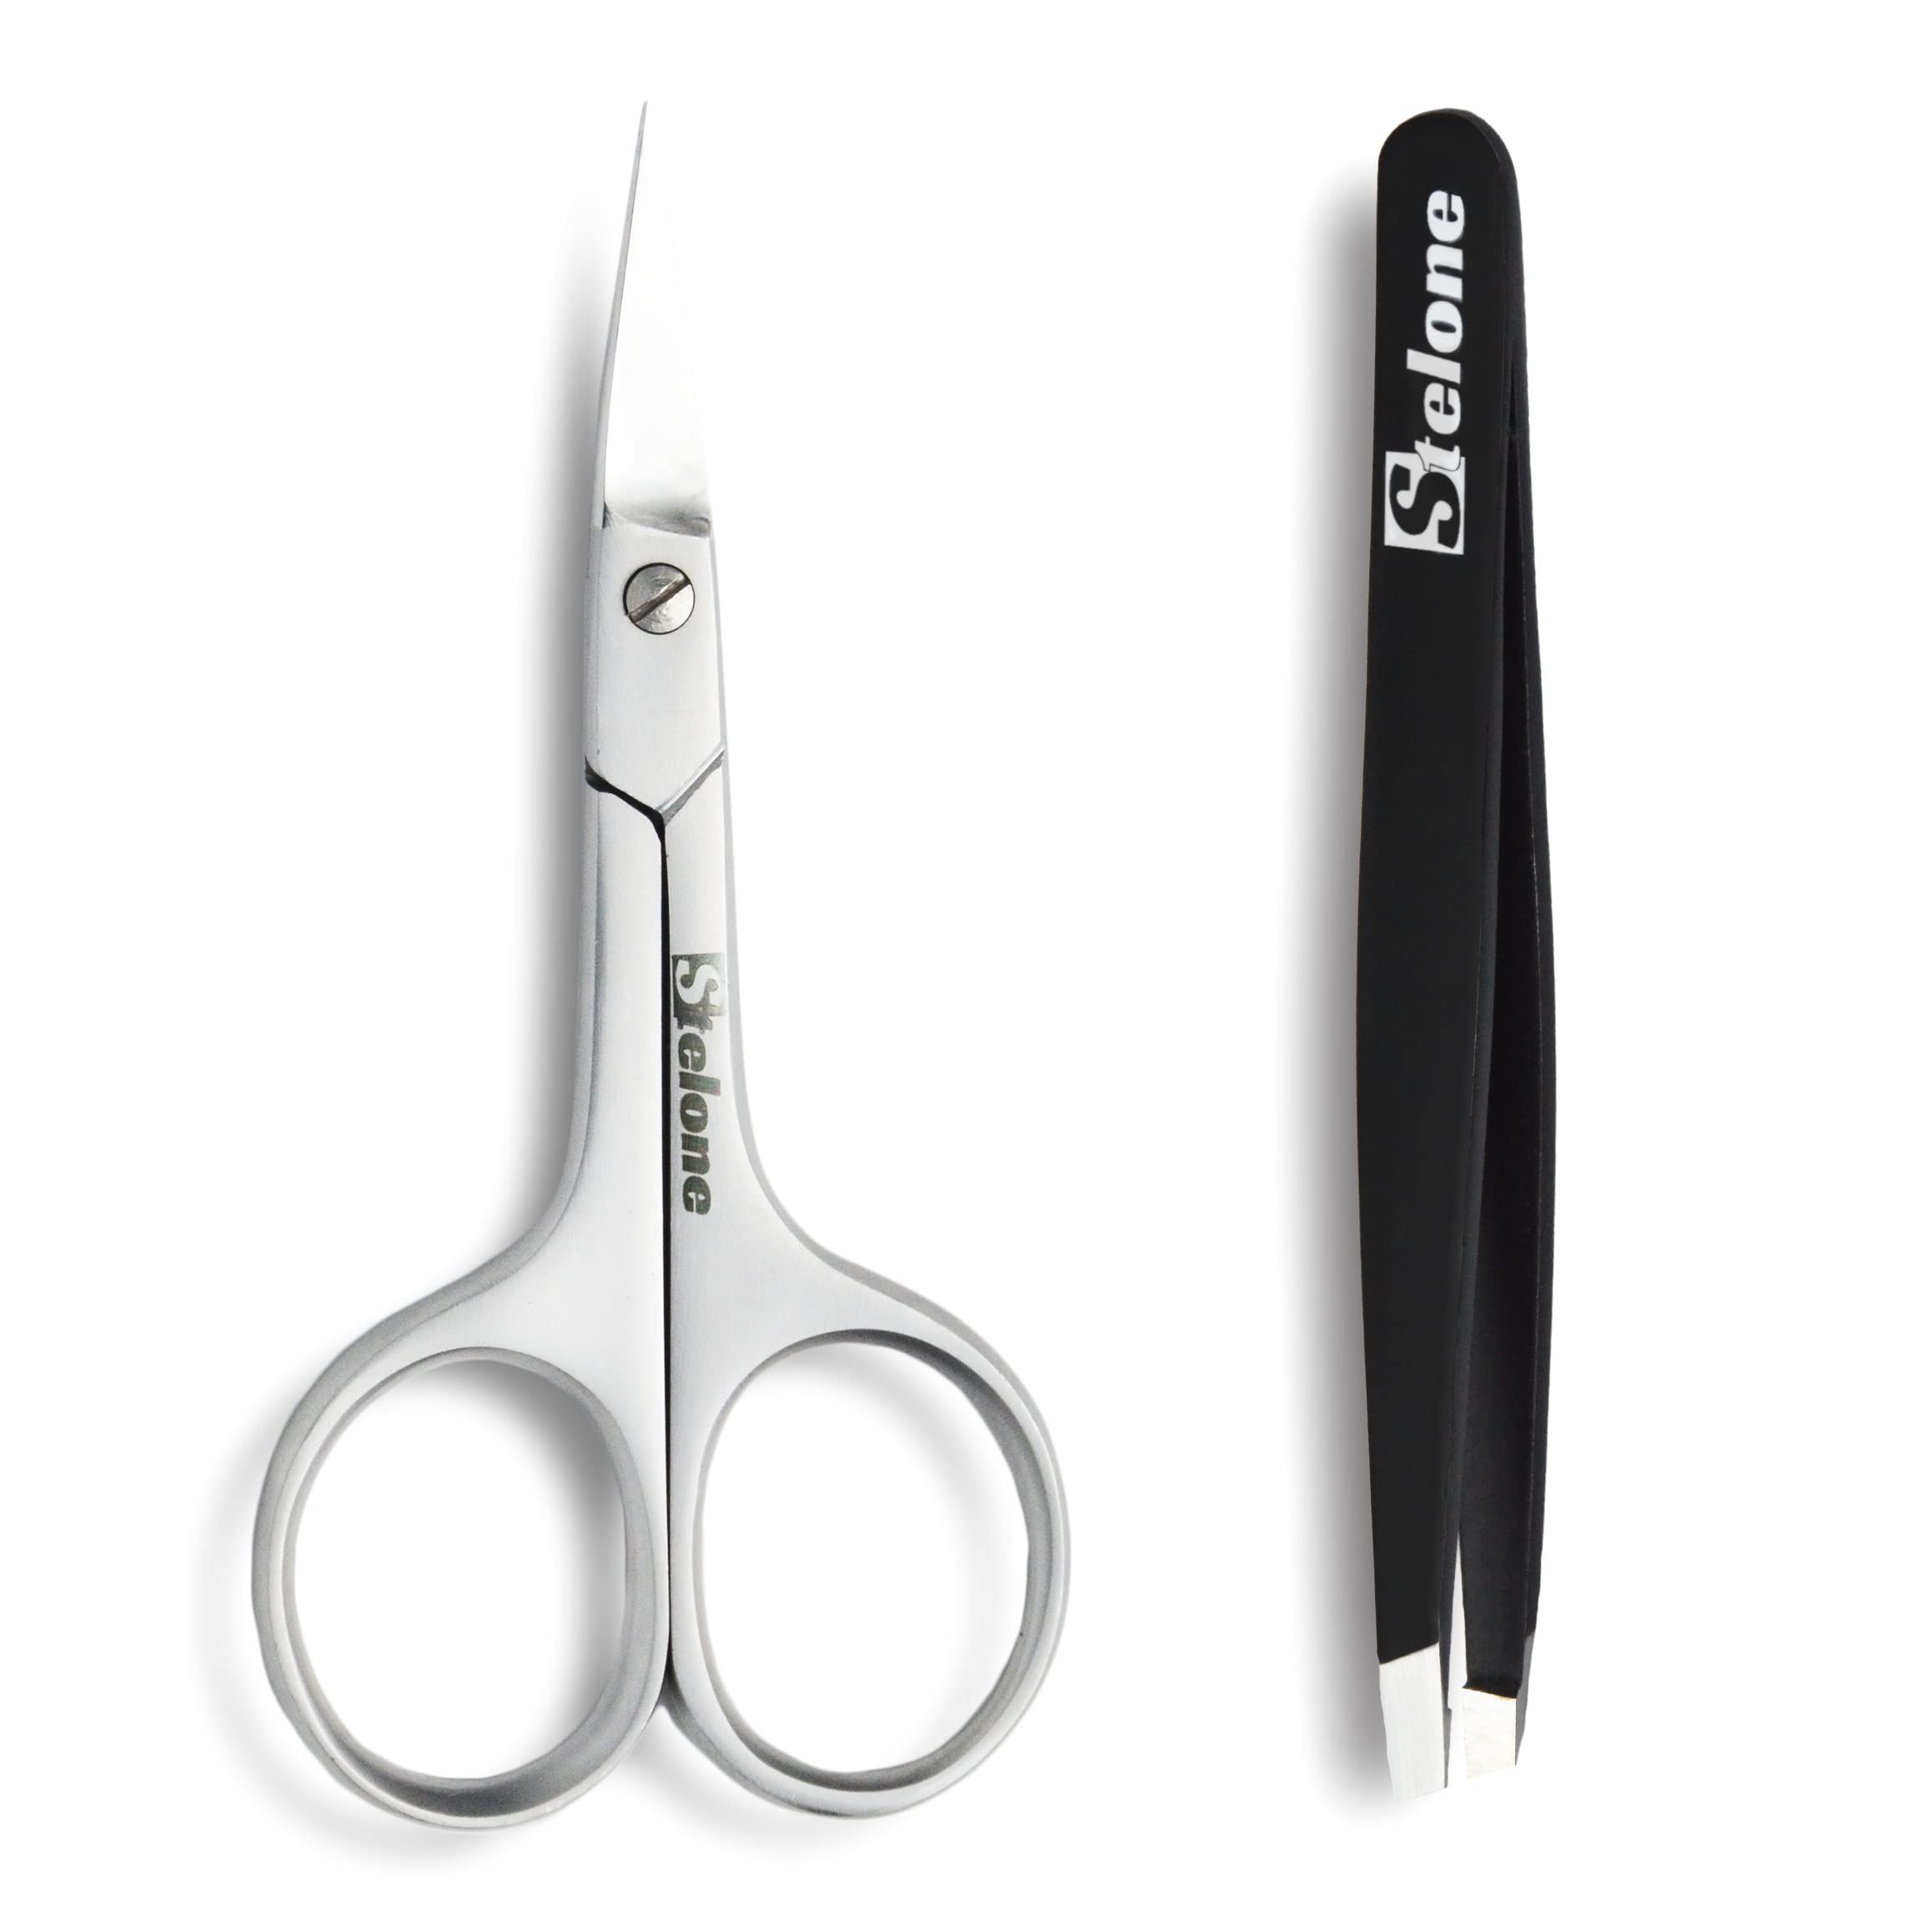 Stelone Professional Grooming Scissors - Eyebrow Scissors - Small Curved  Stainless Steel Manicure & Beauty Scissor for Women